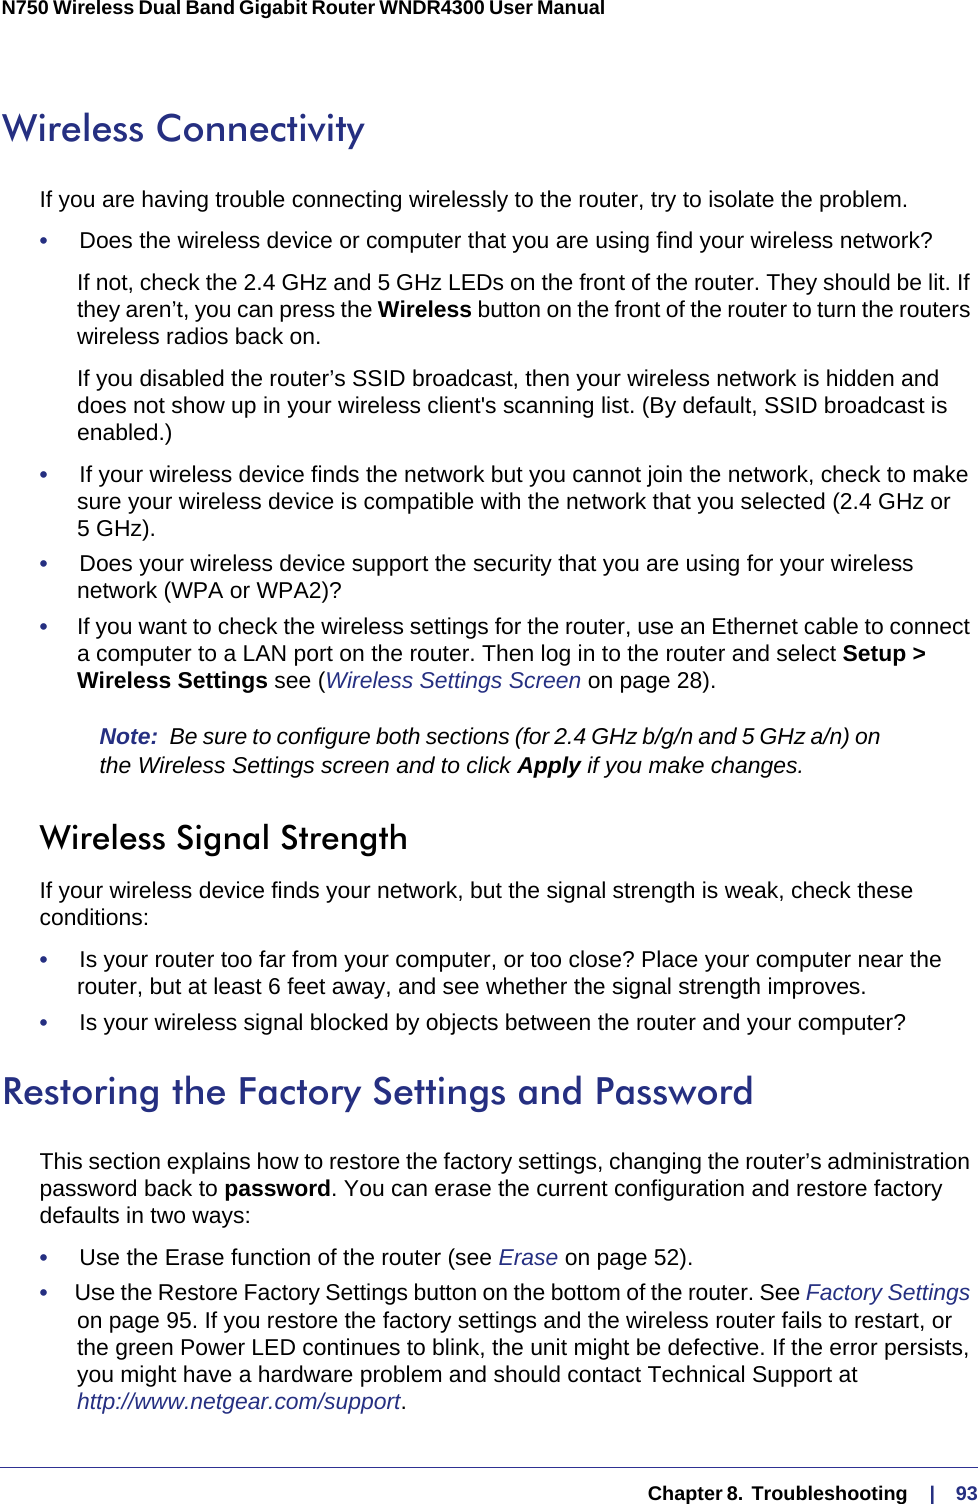   Chapter 8.  Troubleshooting     |    93N750 Wireless Dual Band Gigabit Router WNDR4300 User Manual Wireless ConnectivityIf you are having trouble connecting wirelessly to the router, try to isolate the problem. •     Does the wireless device or computer that you are using find your wireless network?If not, check the 2.4 GHz and 5 GHz LEDs on the front of the router. They should be lit. If they aren’t, you can press the Wireless button on the front of the router to turn the routers wireless radios back on.If you disabled the router’s SSID broadcast, then your wireless network is hidden and does not show up in your wireless client&apos;s scanning list. (By default, SSID broadcast is enabled.)•     If your wireless device finds the network but you cannot join the network, check to make sure your wireless device is compatible with the network that you selected (2.4 GHz or 5  GHz). •     Does your wireless device support the security that you are using for your wireless network (WPA or WPA2)?•     If you want to check the wireless settings for the router, use an Ethernet cable to connect a computer to a LAN port on the router. Then log in to the router and select Setup &gt; Wireless Settings see (Wireless Settings Screen on page  28). Note:  Be sure to configure both sections (for 2.4 GHz b/g/n and 5 GHz a/n) on the Wireless Settings screen and to click Apply if you make changes.Wireless Signal StrengthIf your wireless device finds your network, but the signal strength is weak, check these conditions:•     Is your router too far from your computer, or too close? Place your computer near the router, but at least 6 feet away, and see whether the signal strength improves.•     Is your wireless signal blocked by objects between the router and your computer?Restoring the Factory Settings and PasswordThis section explains how to restore the factory settings, changing the router’s administration password back to password. You can erase the current configuration and restore factory defaults in two ways:•     Use the Erase function of the router (see Erase on page  52).•     Use the Restore Factory Settings button on the bottom of the router. See Factory Settings on page  95. If you restore the factory settings and the wireless router fails to restart, or the green Power LED continues to blink, the unit might be defective. If the error persists, you might have a hardware problem and should contact Technical Support at http://www.netgear.com/support.